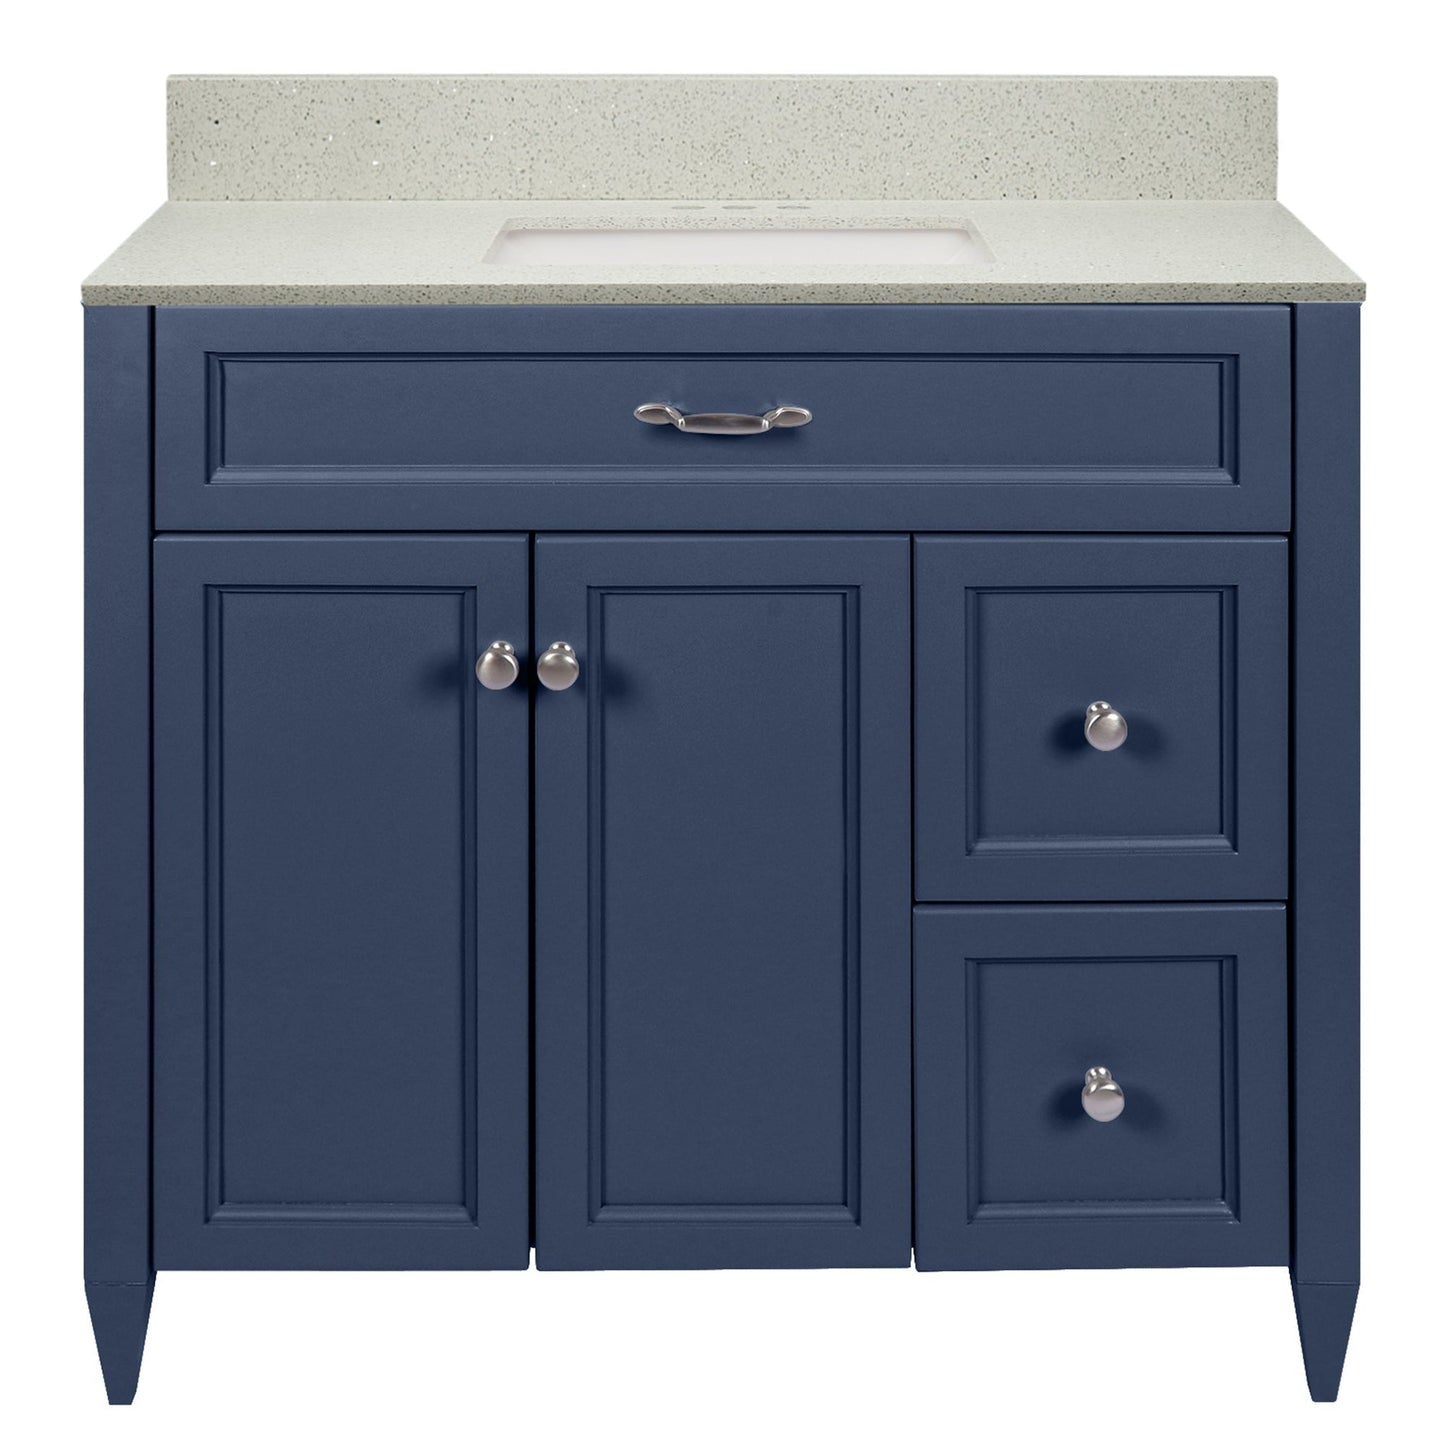 Ella’s Bubbles Vail 37" Navy Blue Bathroom Vanity With Galaxy White Quartz Stone Top With Backsplash and Sink